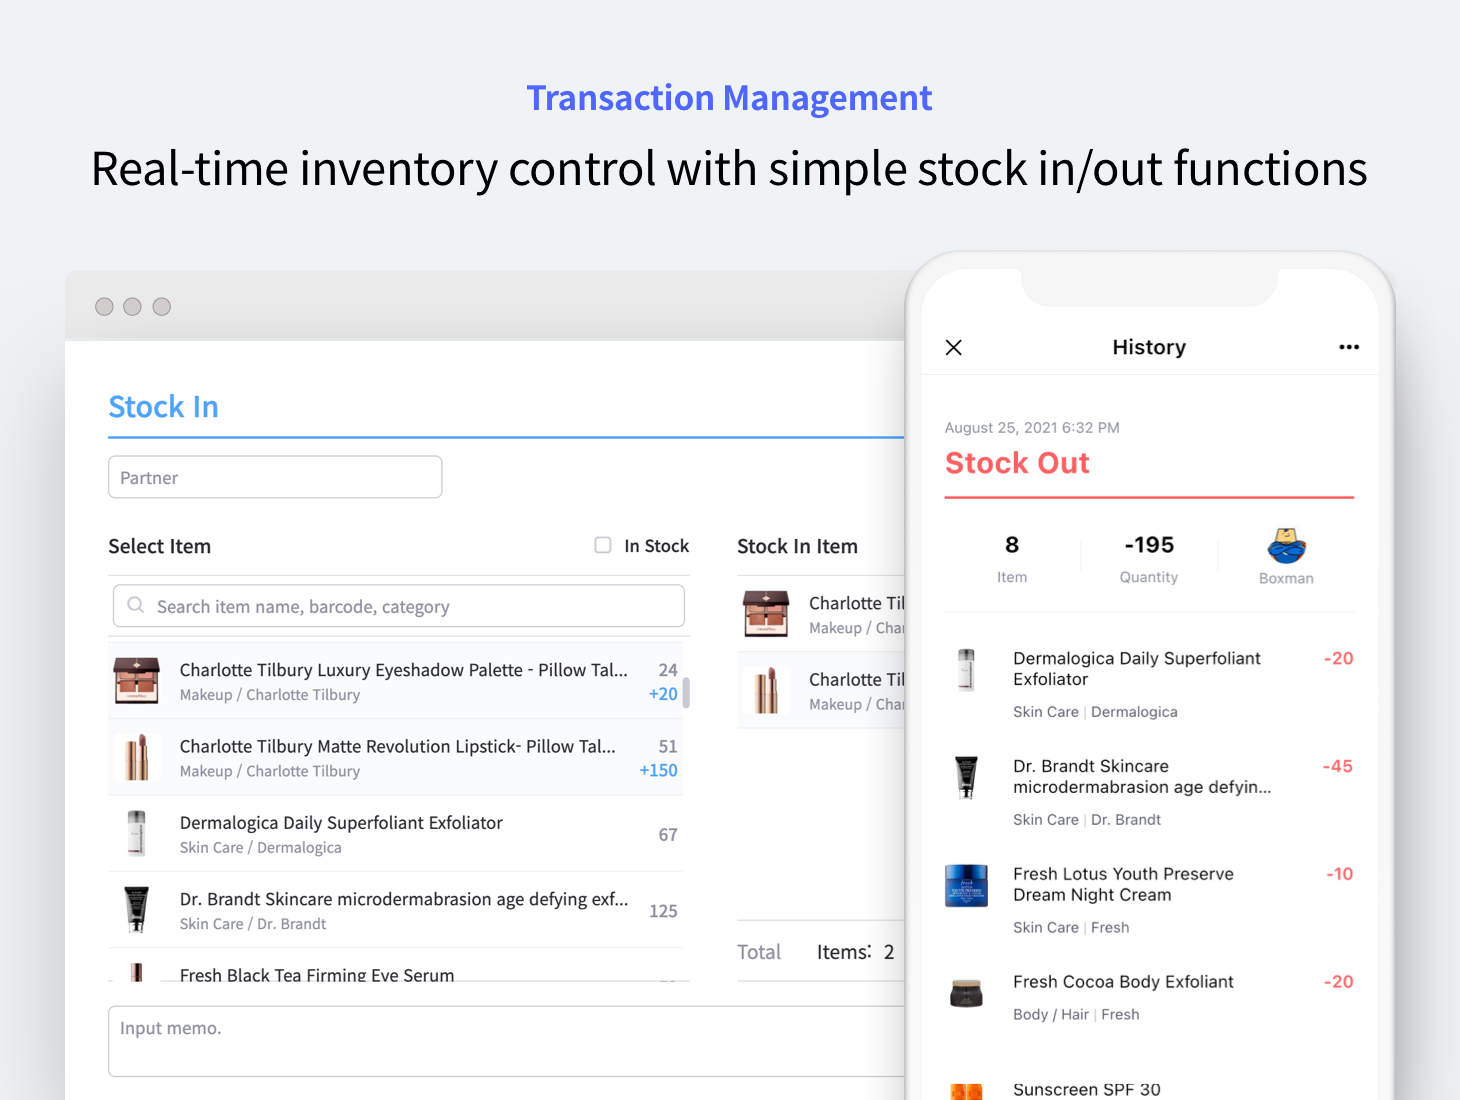 Transaction Management: Control inventory in real-time with simple stock in/out functions